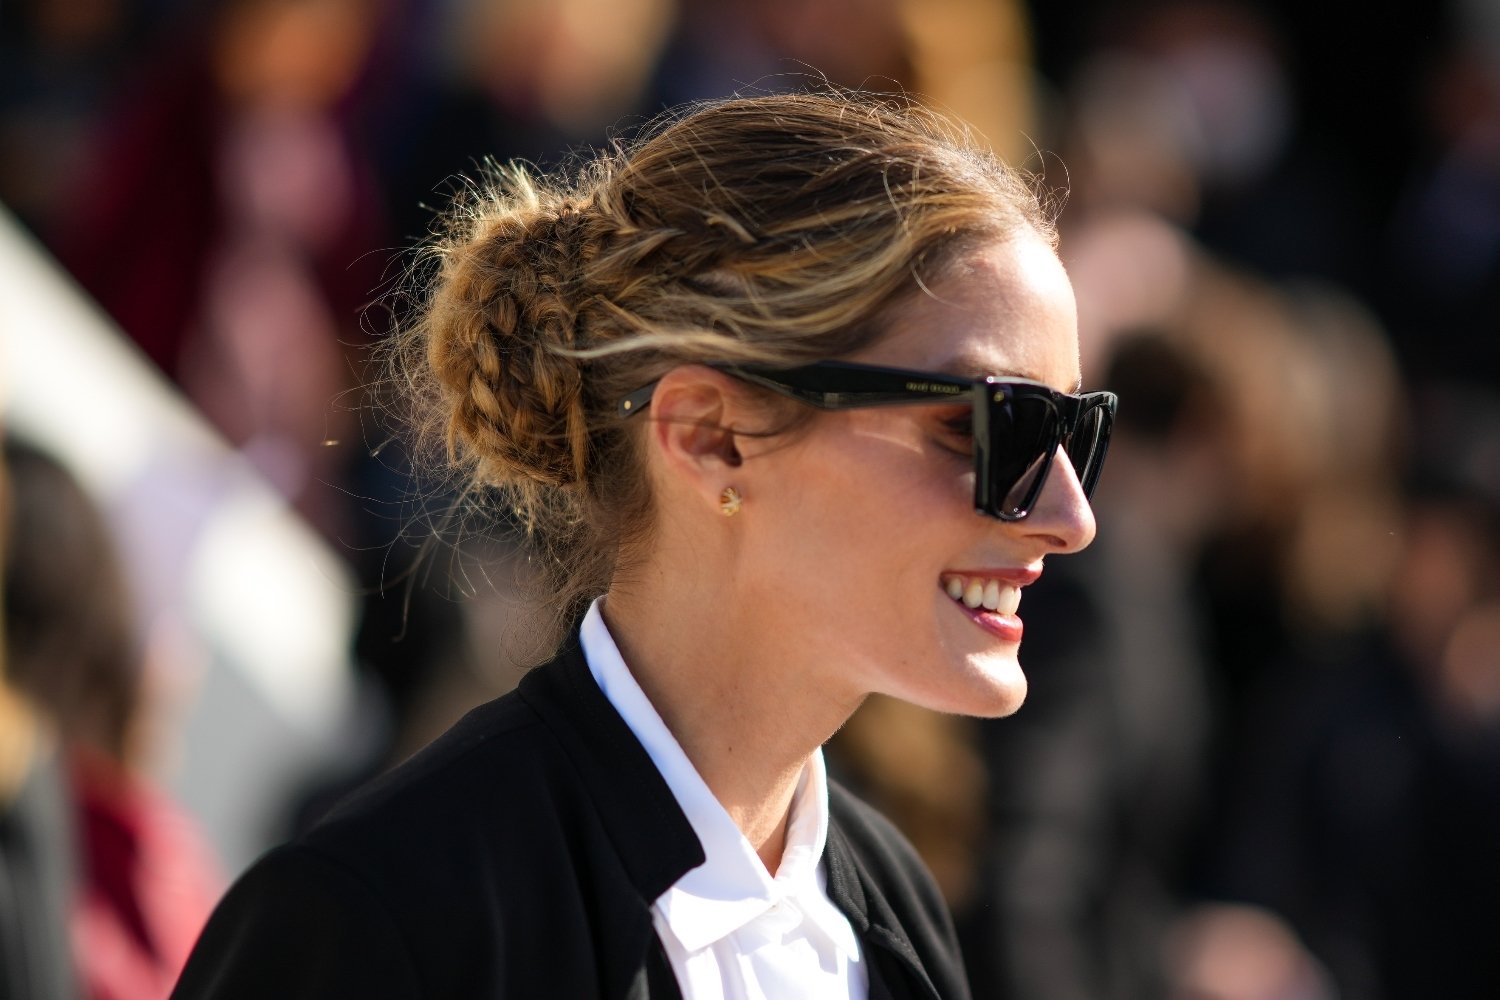 Olivia Palermo's braided updo is the most